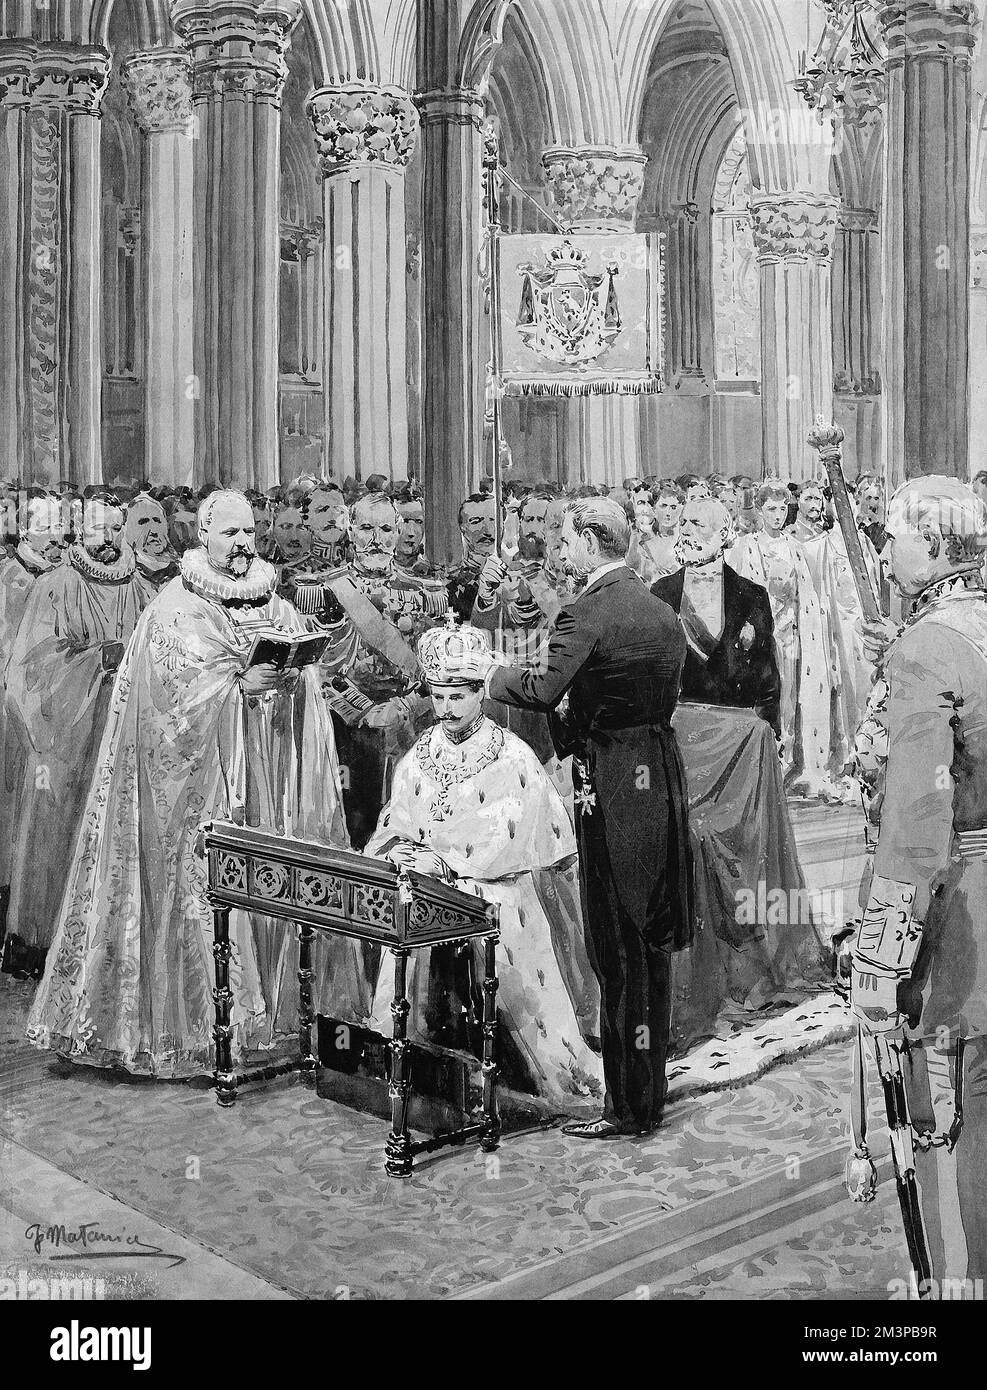 The Coronation of Haakon VII (Prince Carl of Denmark and Iceland, born Christian Frederik Carl Georg Valdemar Axel (18721957) and Queen Maud of Norway in Nidaros Cathedral in Trondheim on the 22nd June 1906.     Date: 1906 Stock Photo